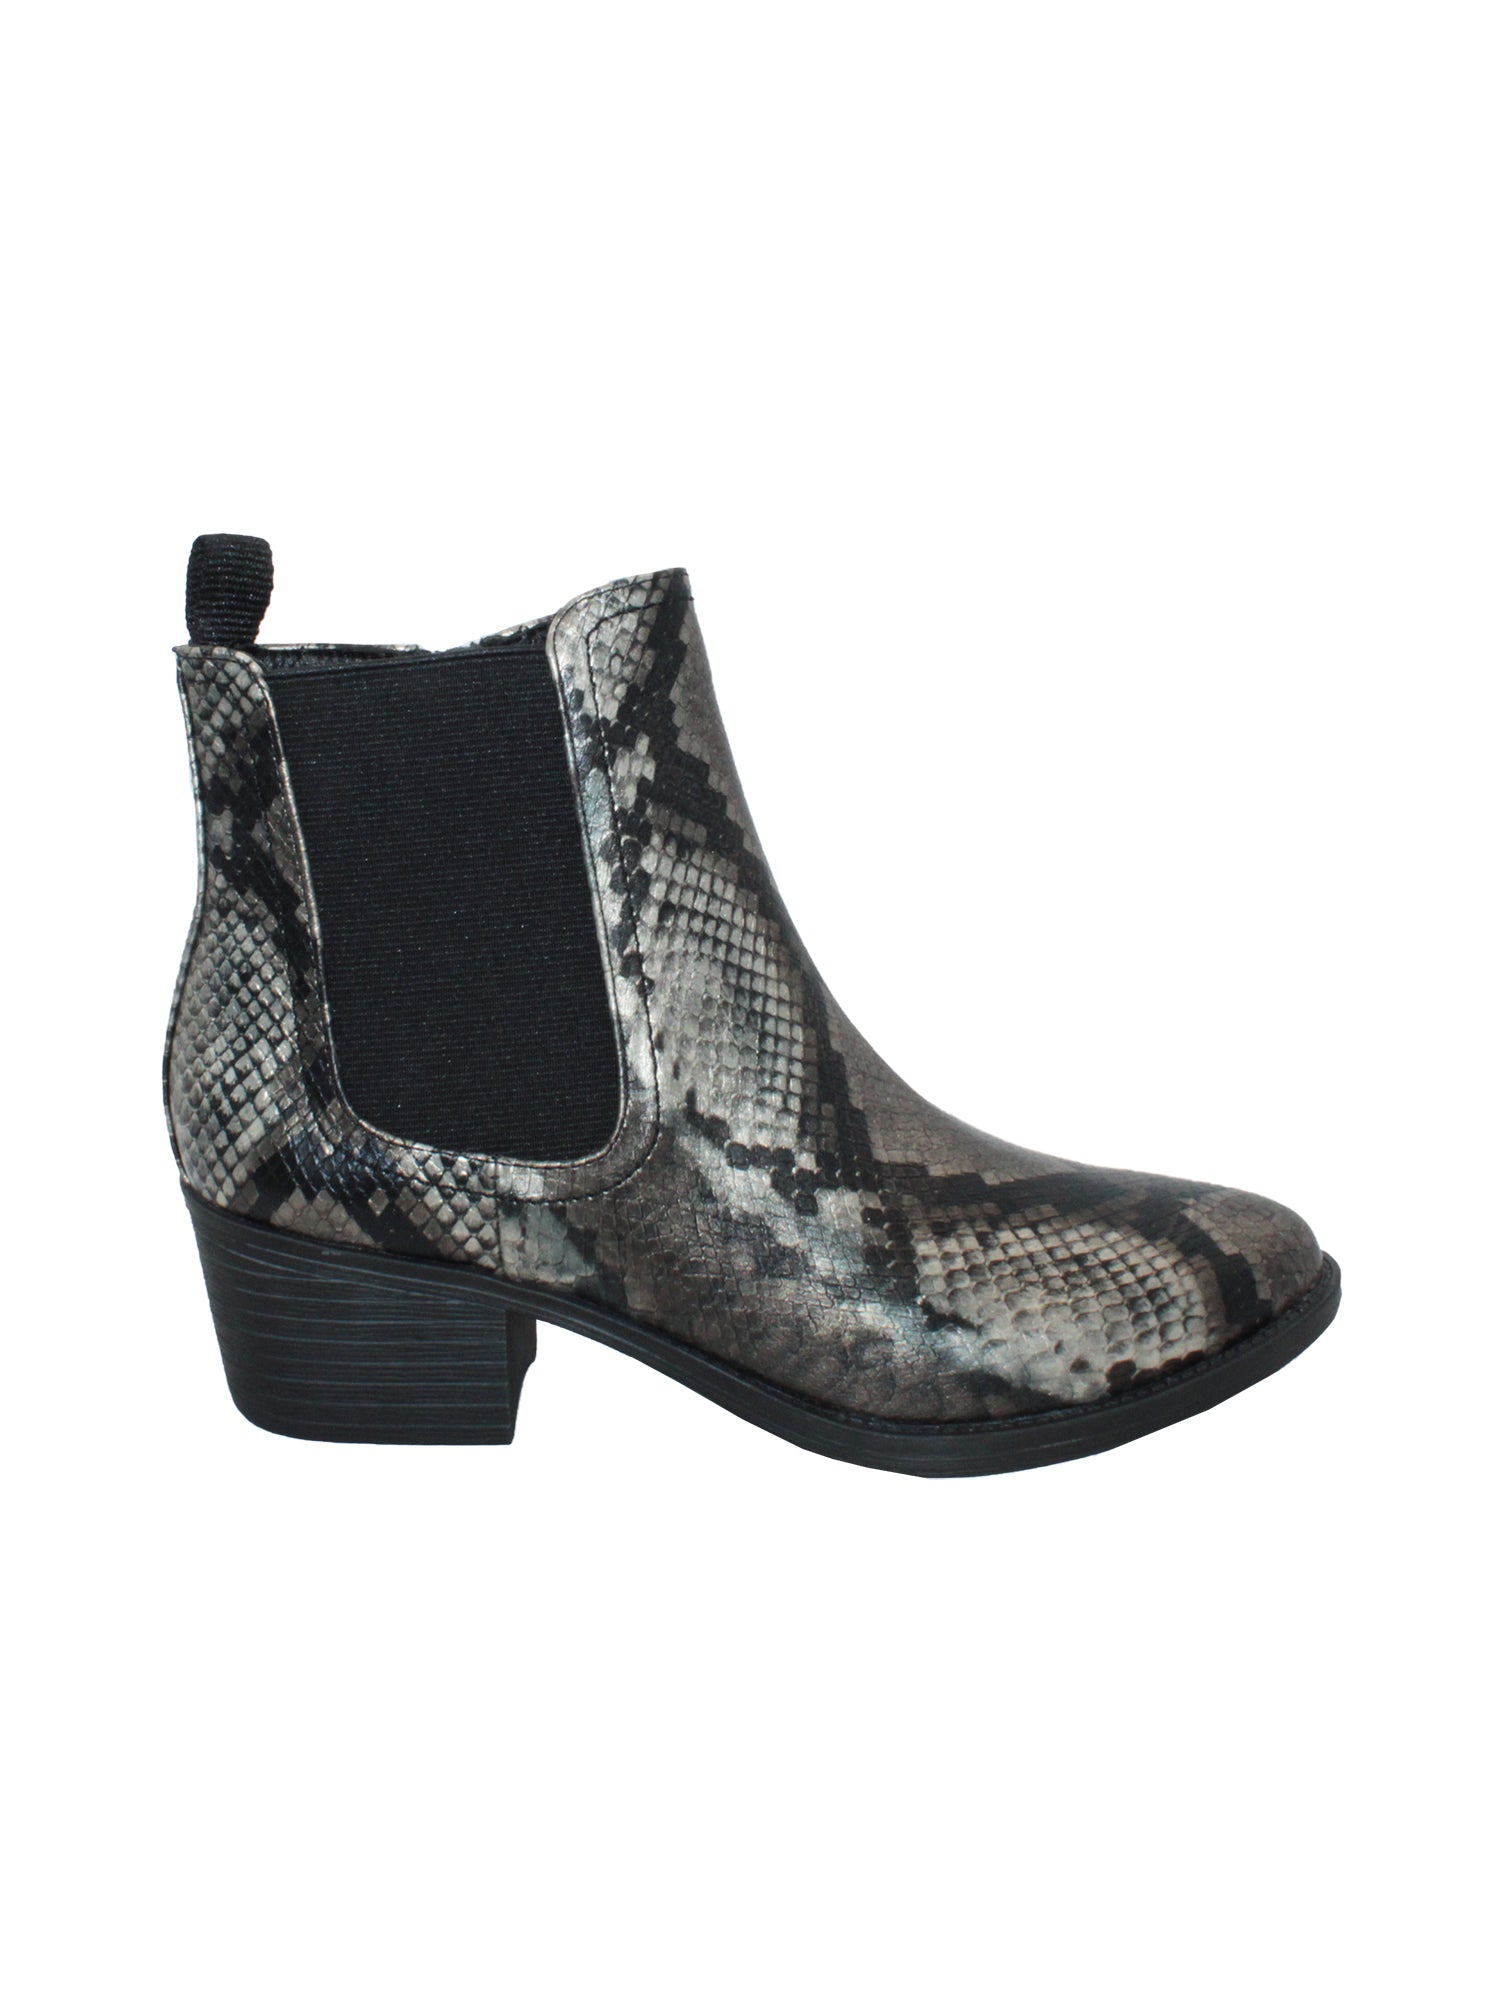 The ‘Carriage’ Chelsea bootie by Volatile, in beautiful rustic effect faux leather or matte metallic faux snake, is right on trend with a wide elastic side panel allowing for flexibility and comfort while walking. We took the level of ease a step further by adding an inside zipper, making these booties effortless to put on and off.  bronze multi